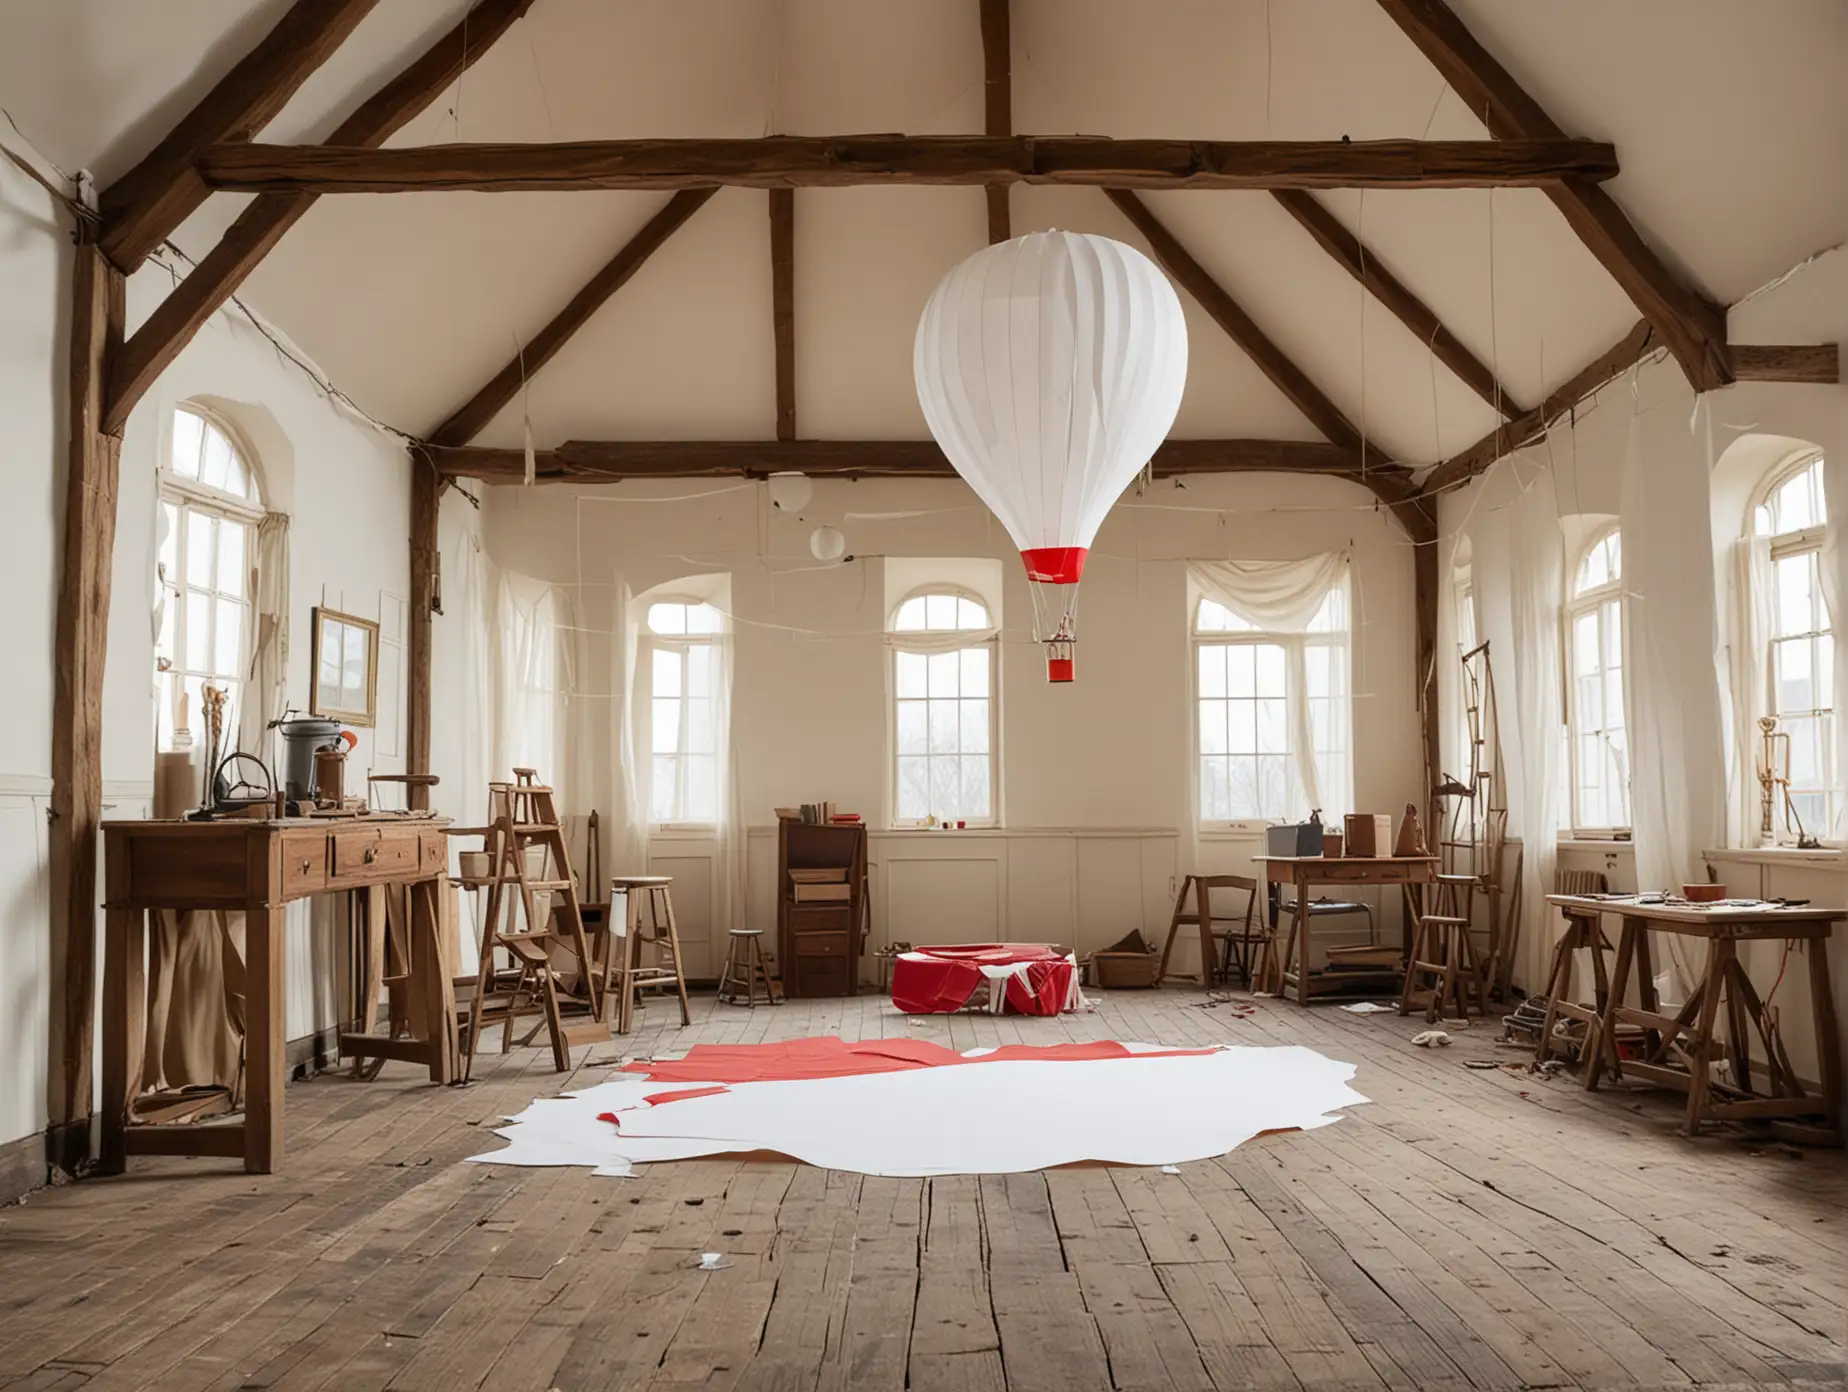 18th century workshop interior with a large half-constucted red and white paper hot air balloon lying flat on the floor